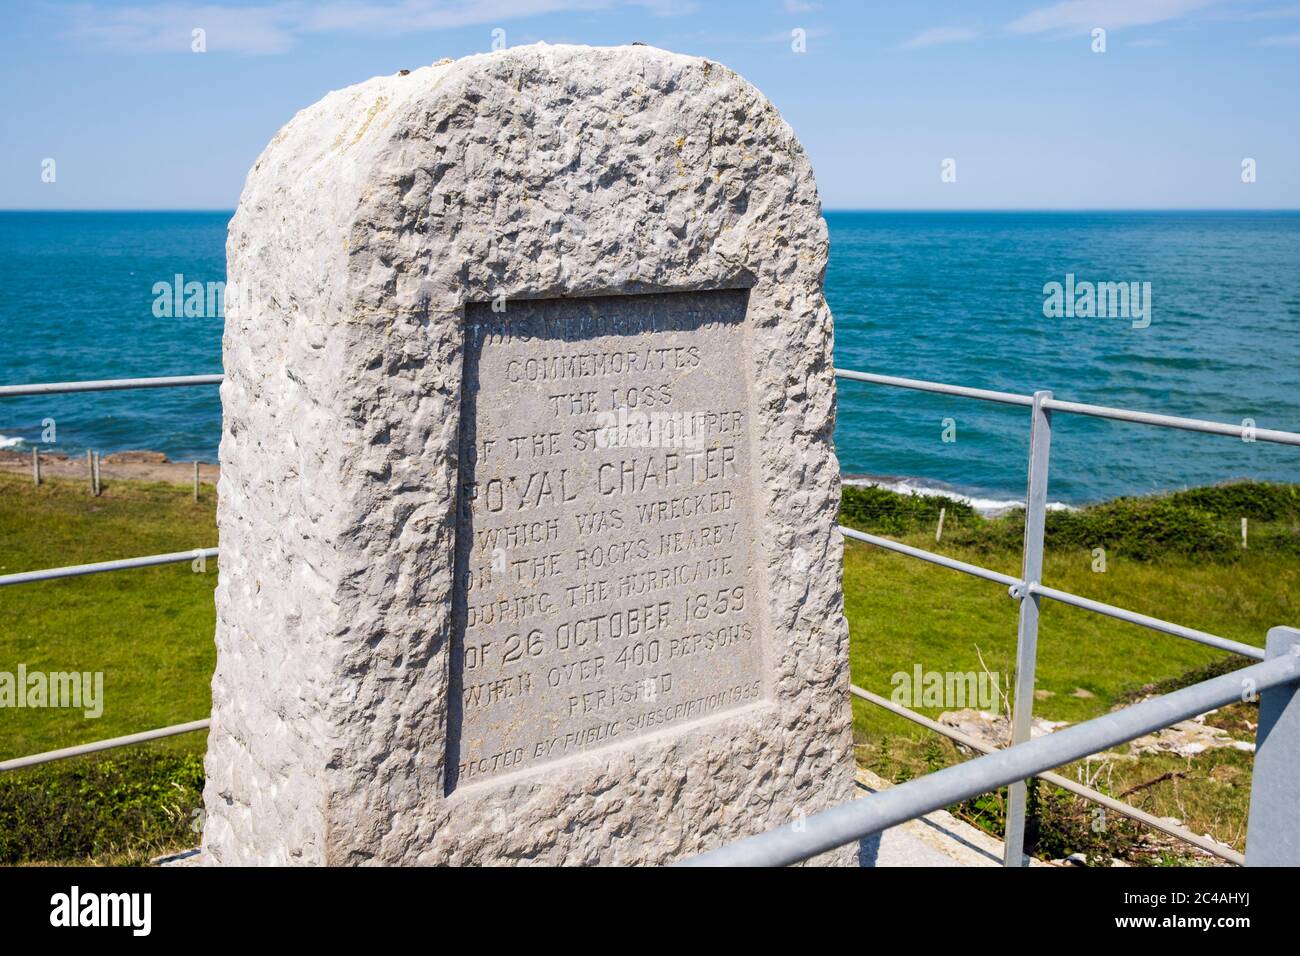 Royal Charter memorial on coast near where steam clipper ship was shipwrecked in 1859. Moelfre, Isle of Anglesey, Wales, UK, Britain Stock Photo